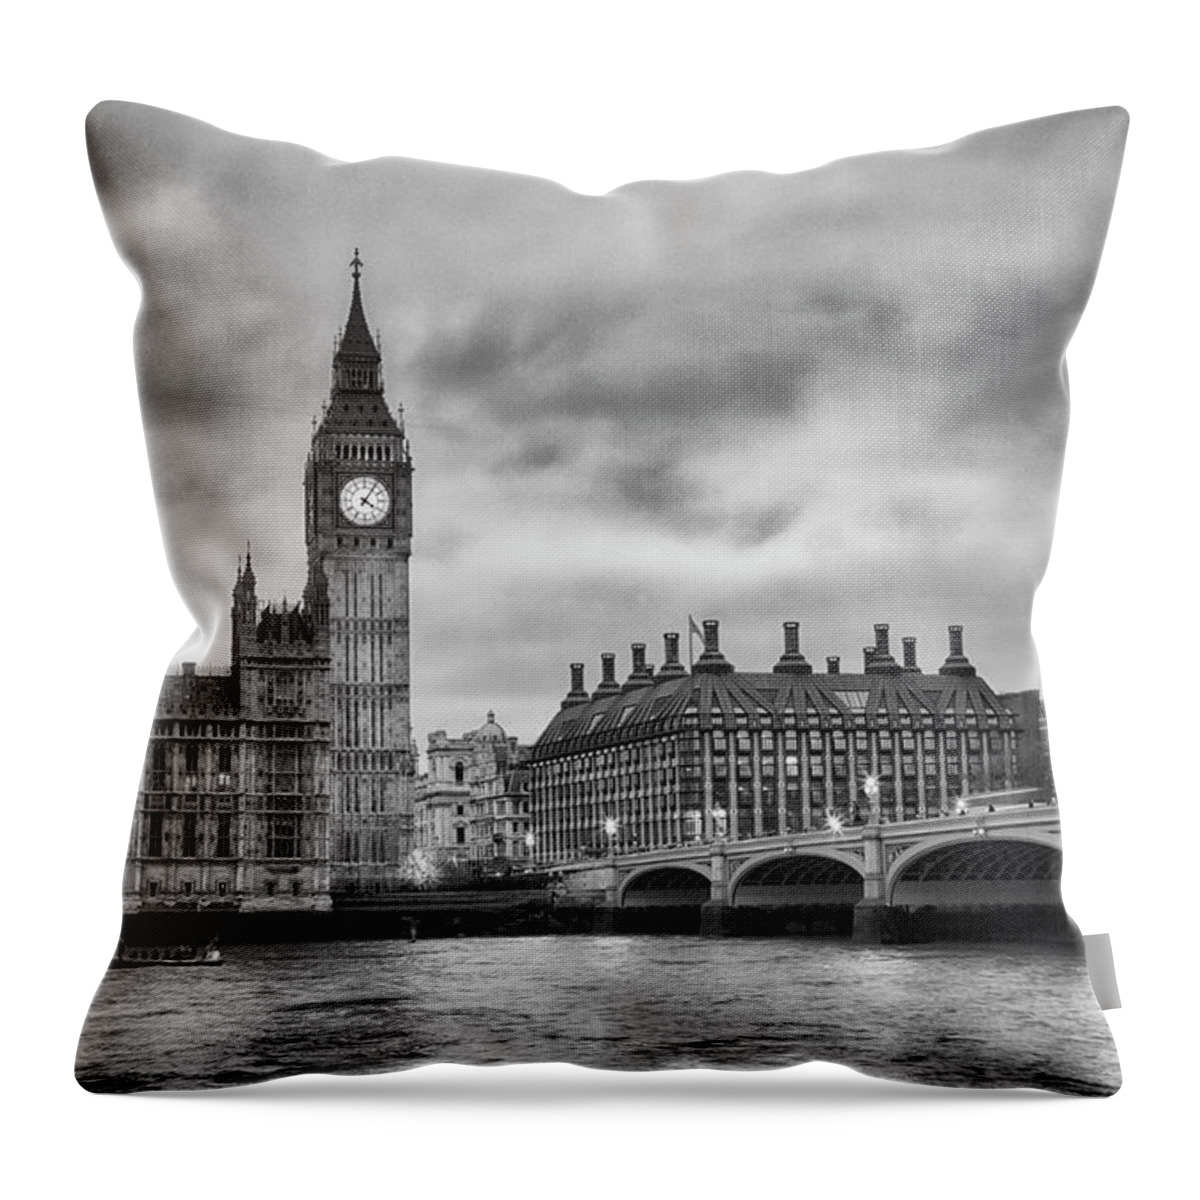 Clock Tower Throw Pillow featuring the photograph Big Ben by Elisabeth Pollaert Smith